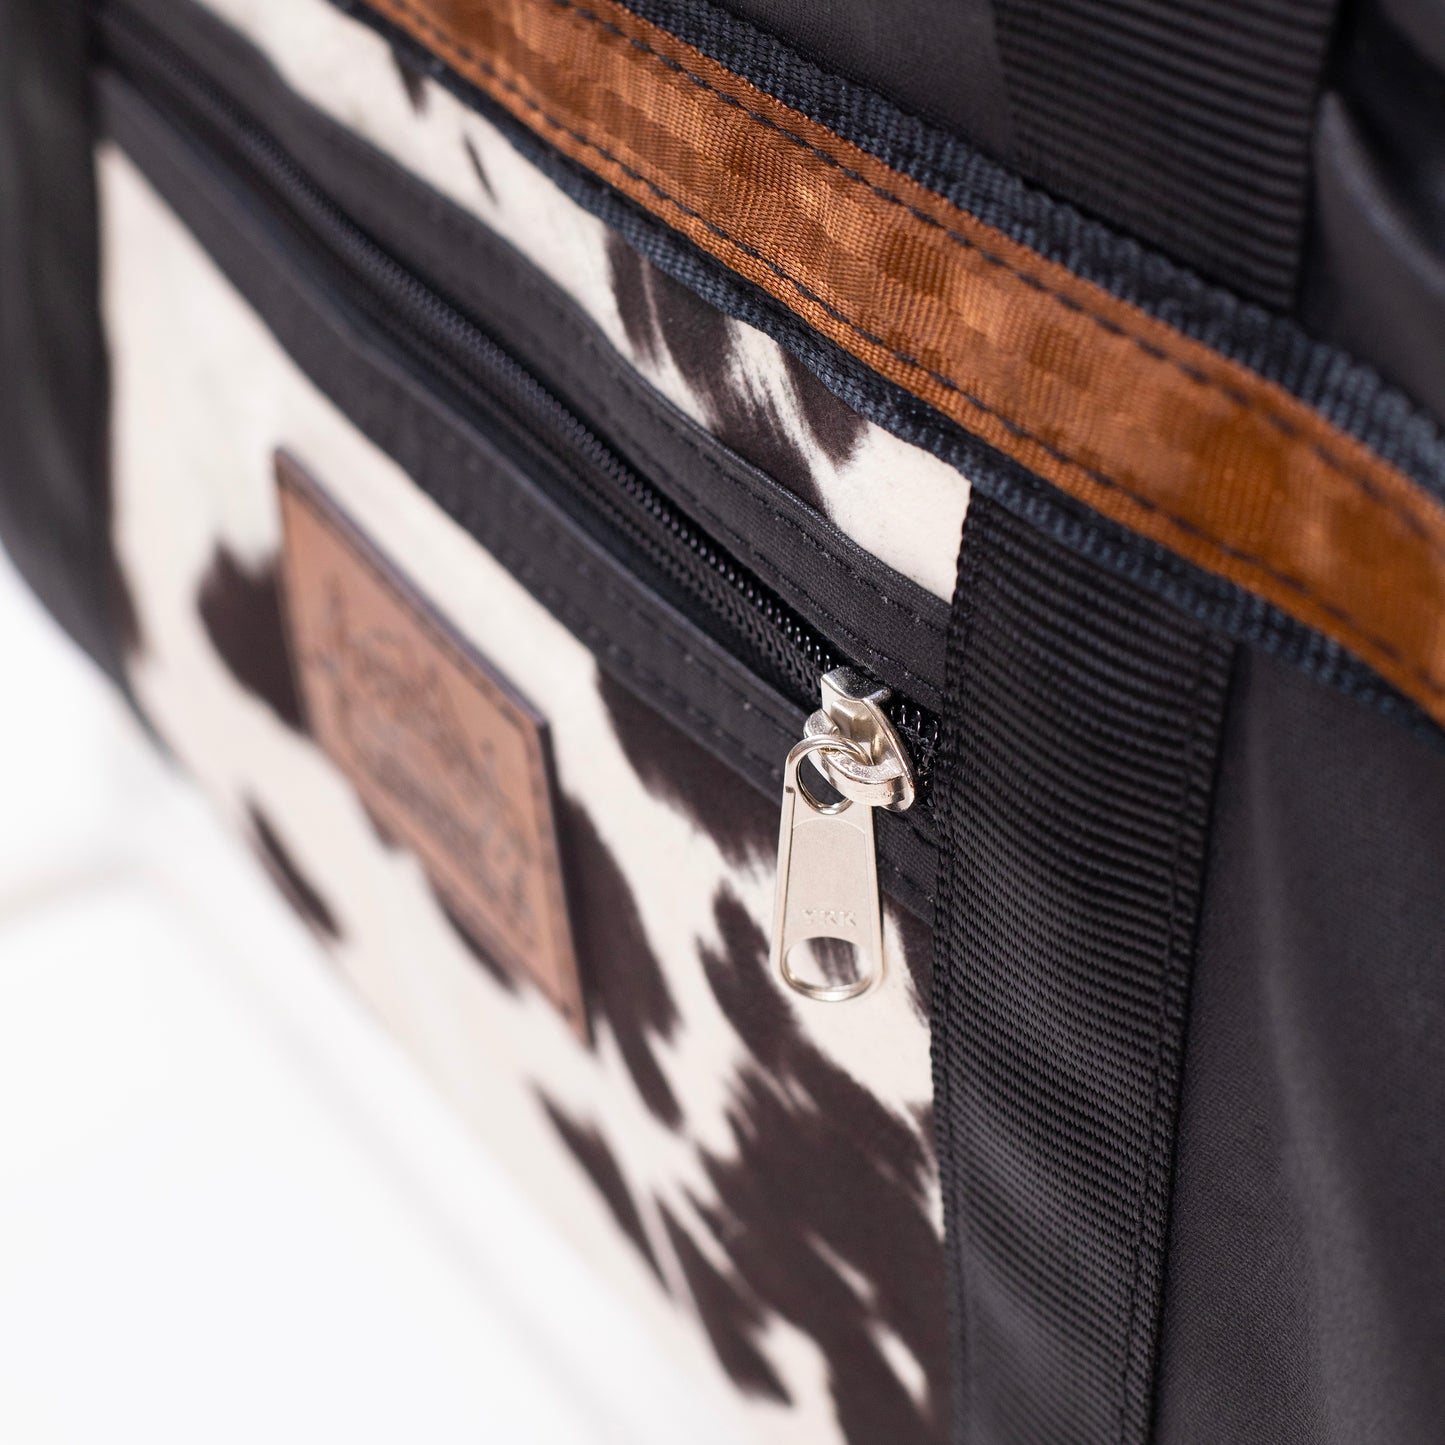 Black Canvas Travel Bag with limited edition cow print fabric.